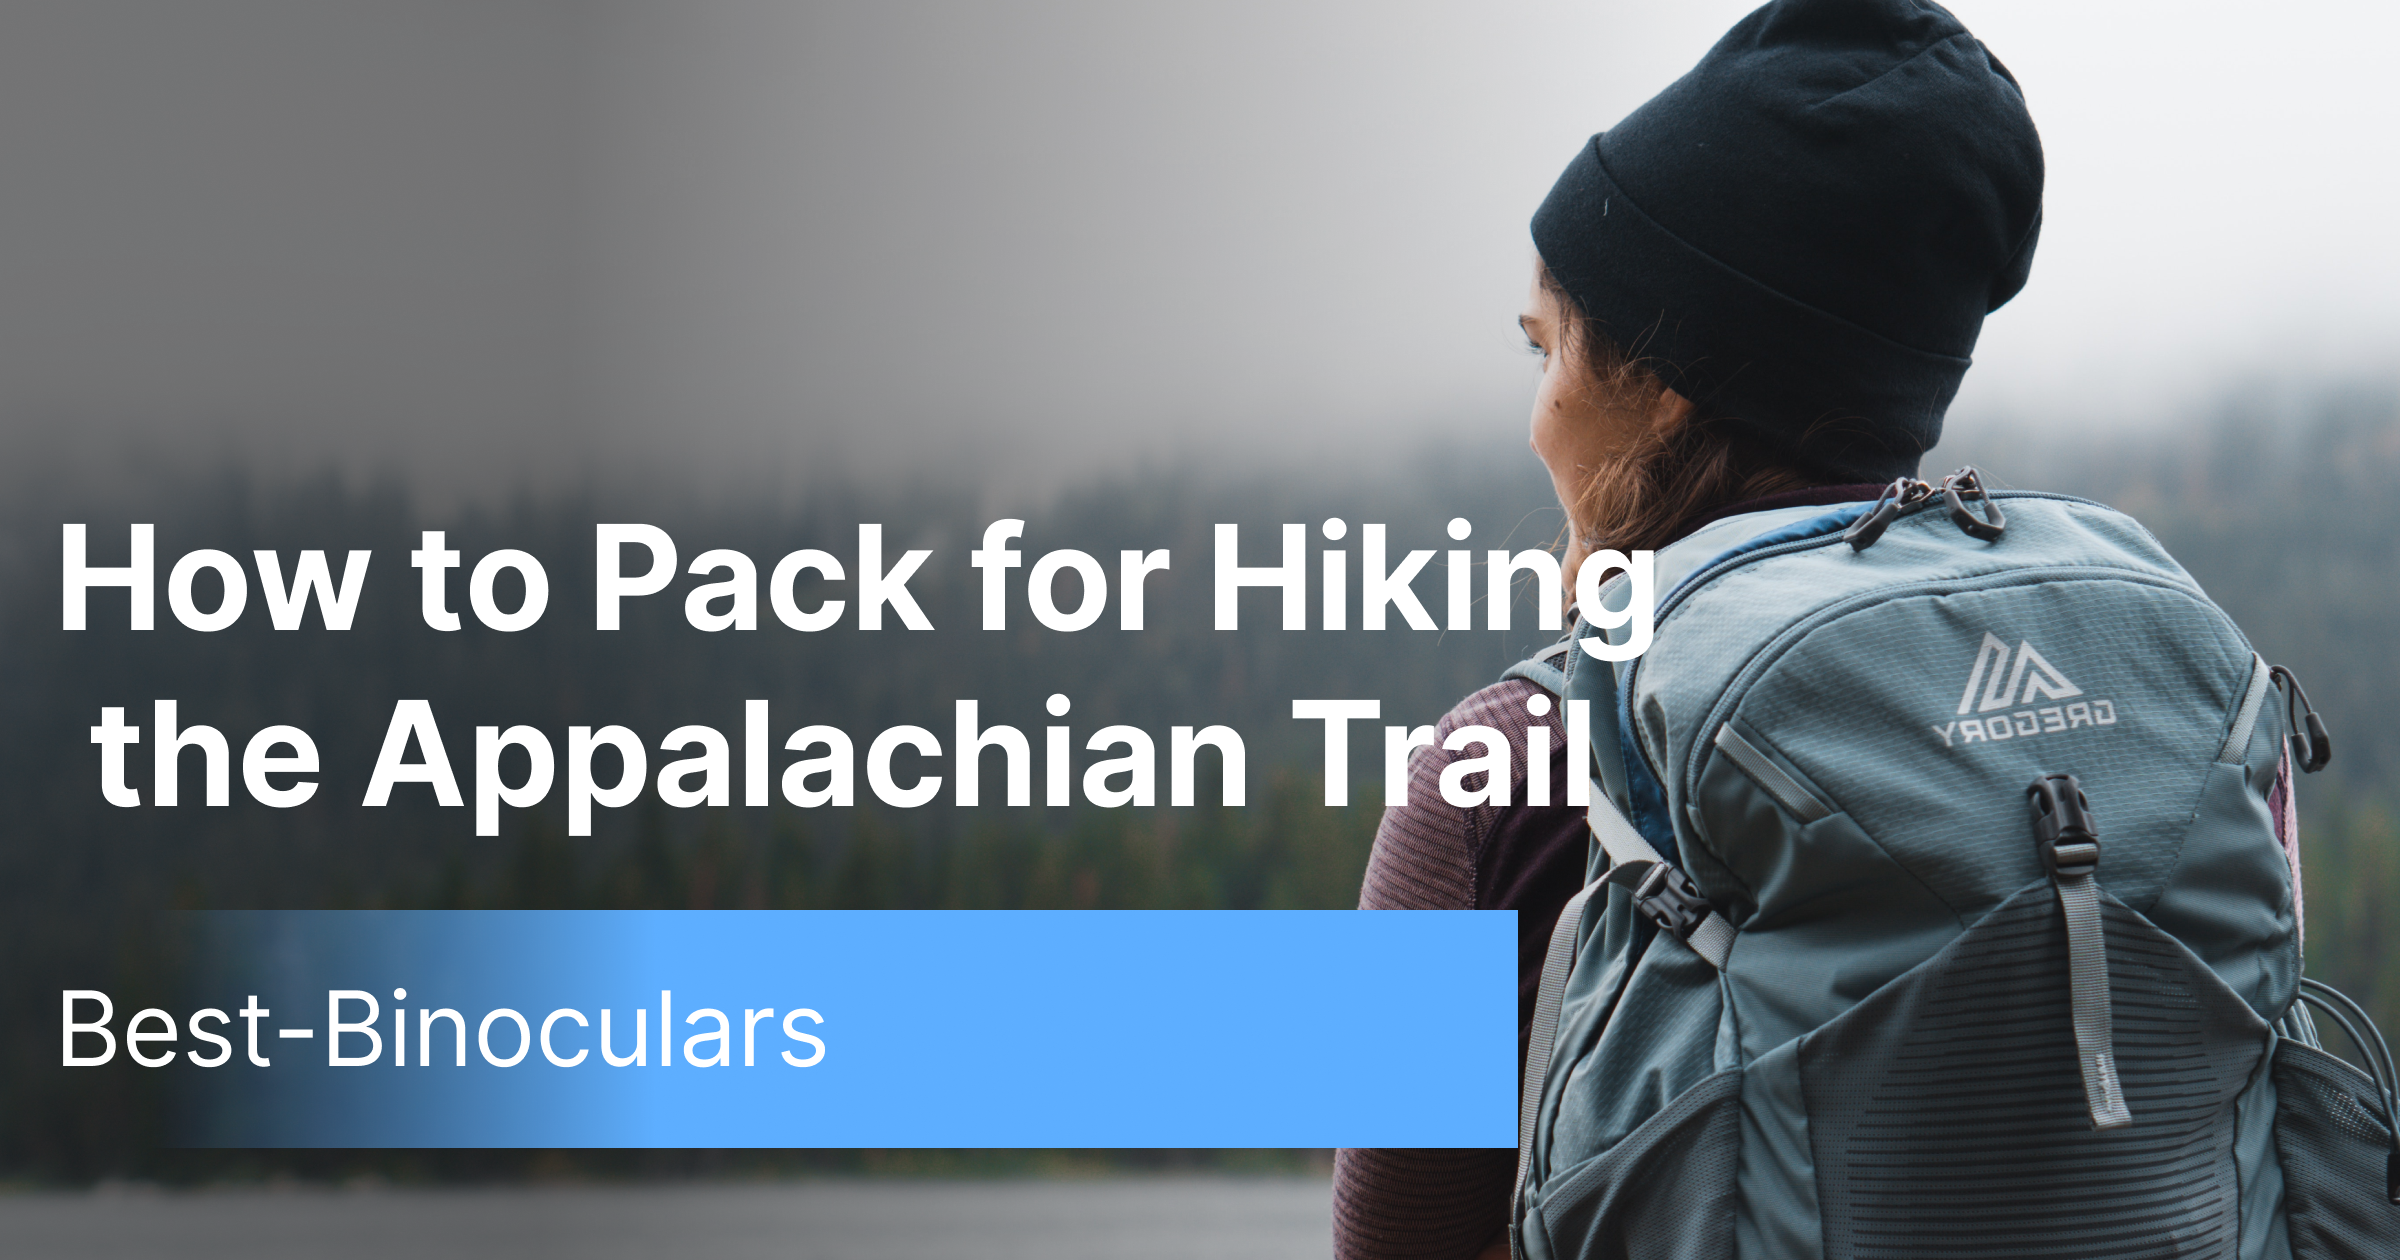 Packing for Appalachian Trail